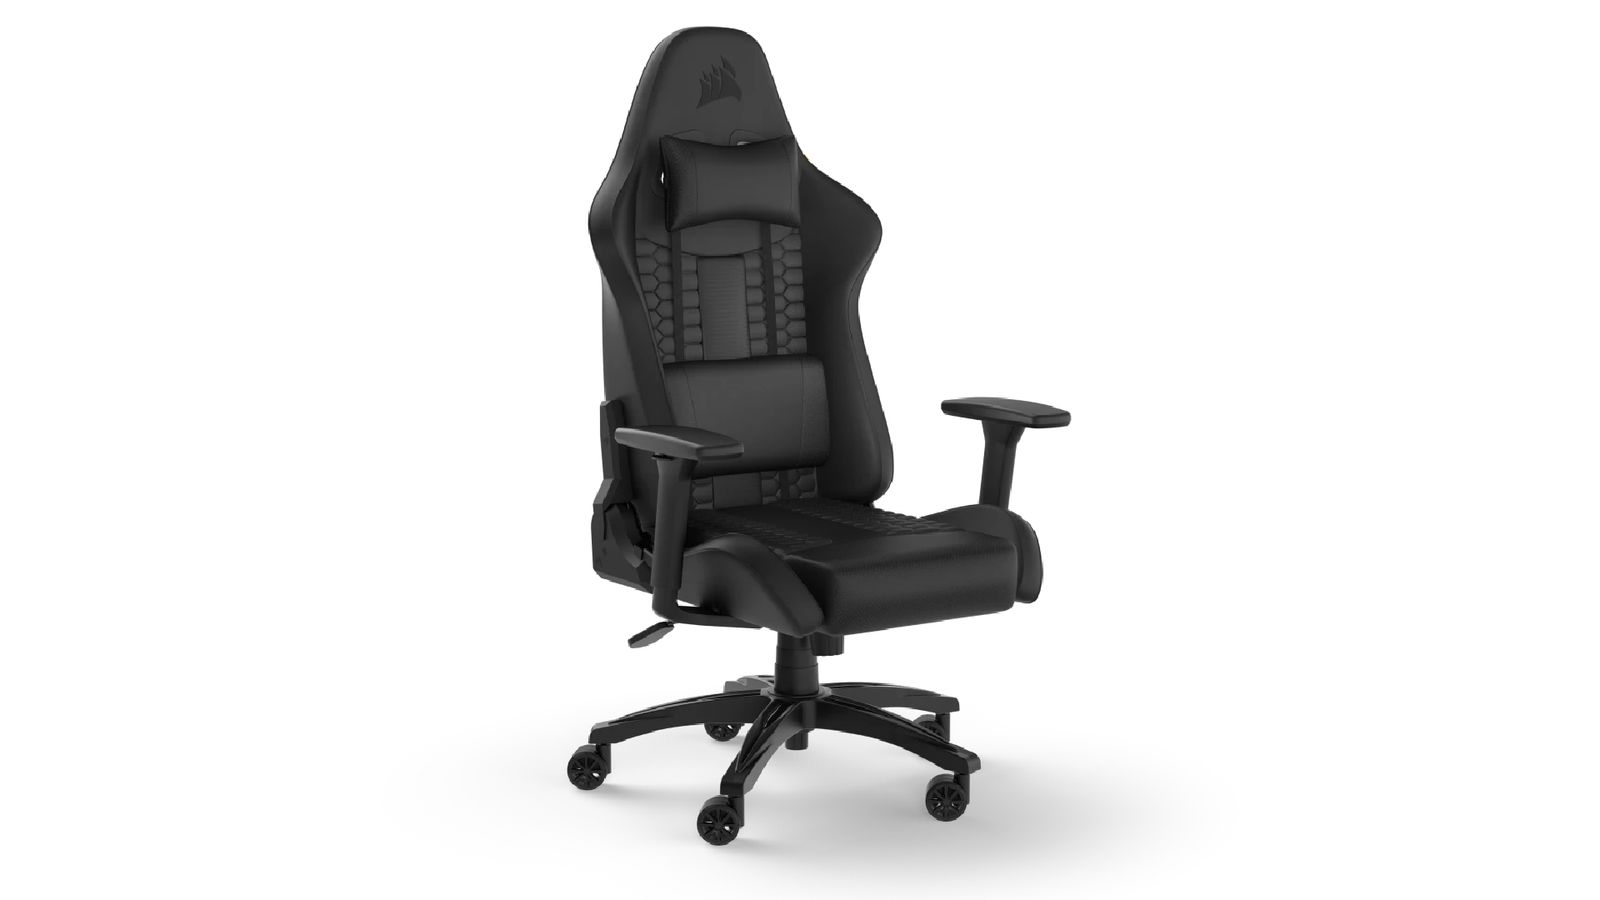 Corsair TC100 Relaxed product image of an all-black office-style gaming chair.